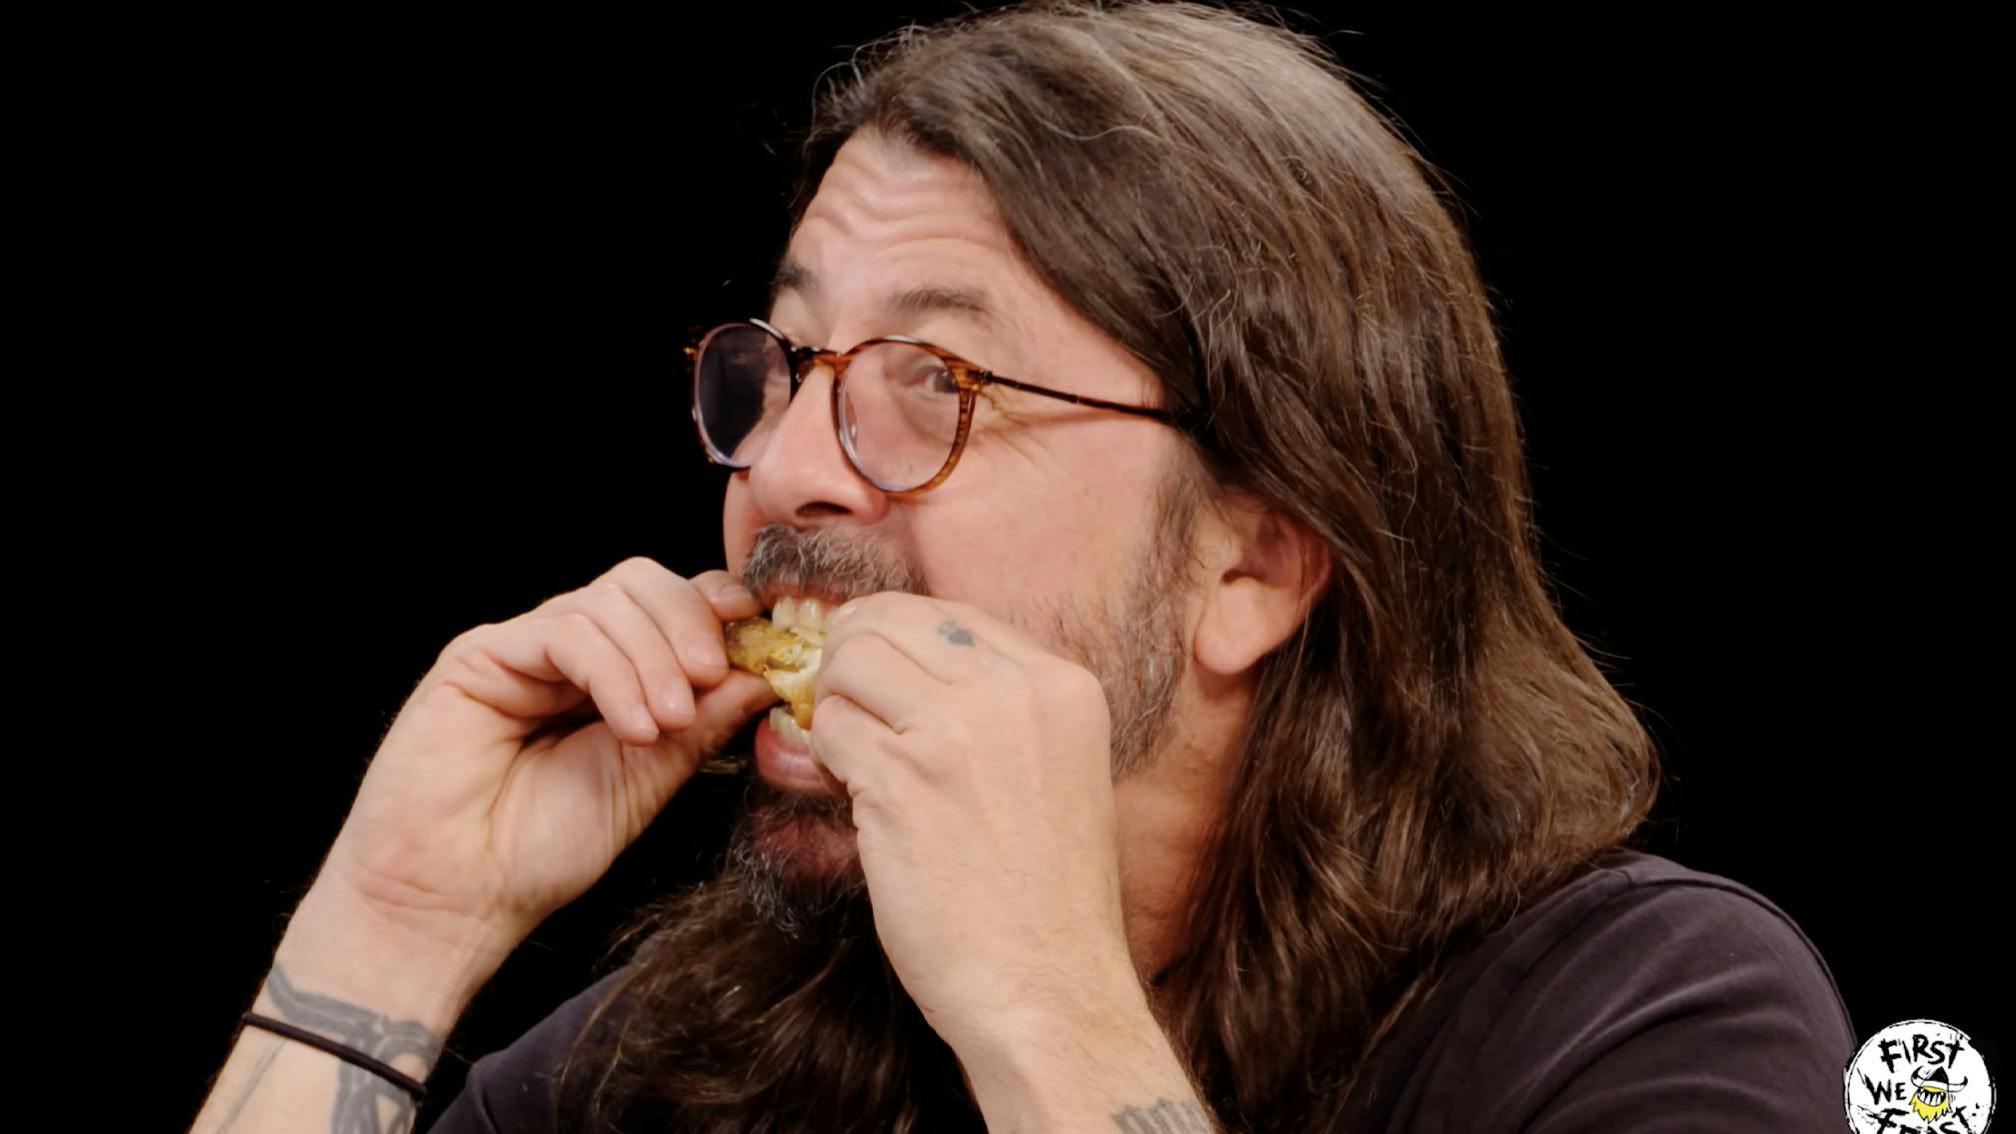 Watch: Dave Grohl finally appears on Hot Ones after becoming one of their “most-requested guests of all-time”